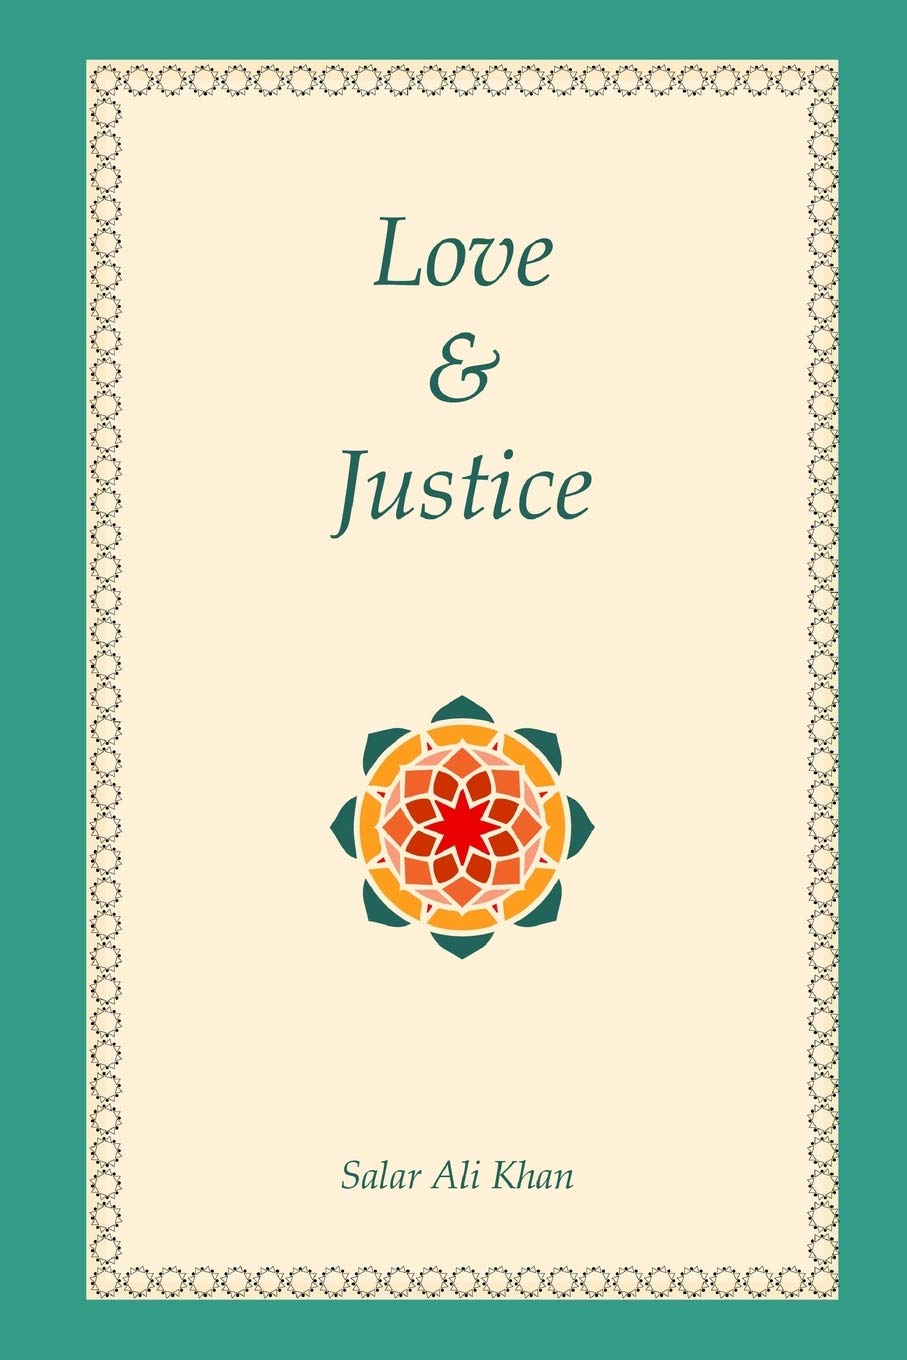 Love and Justice
